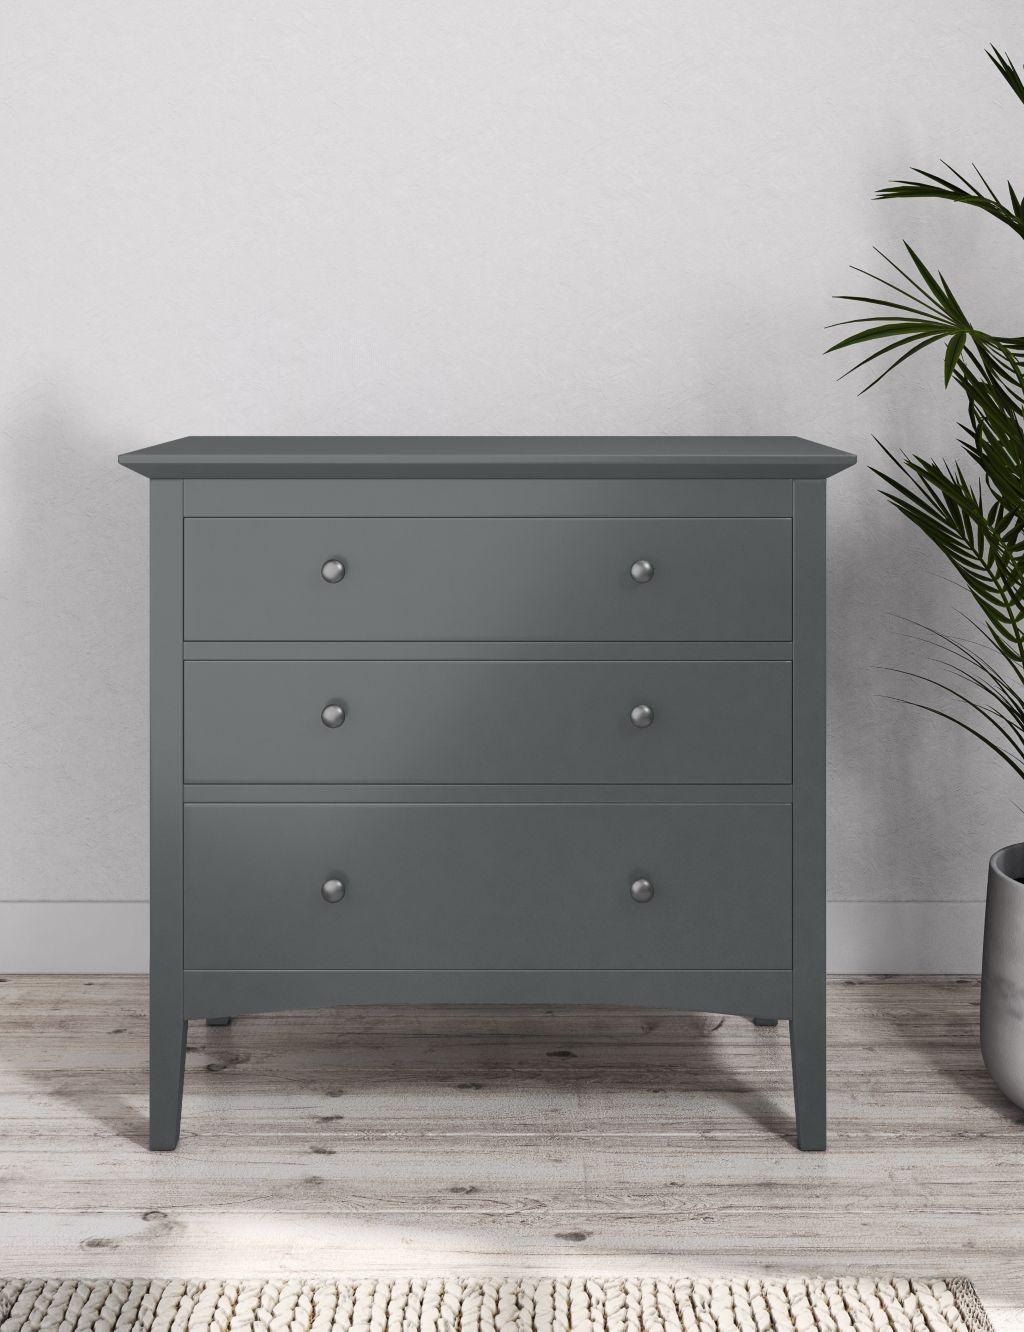 Hastings 3 Drawer Chest